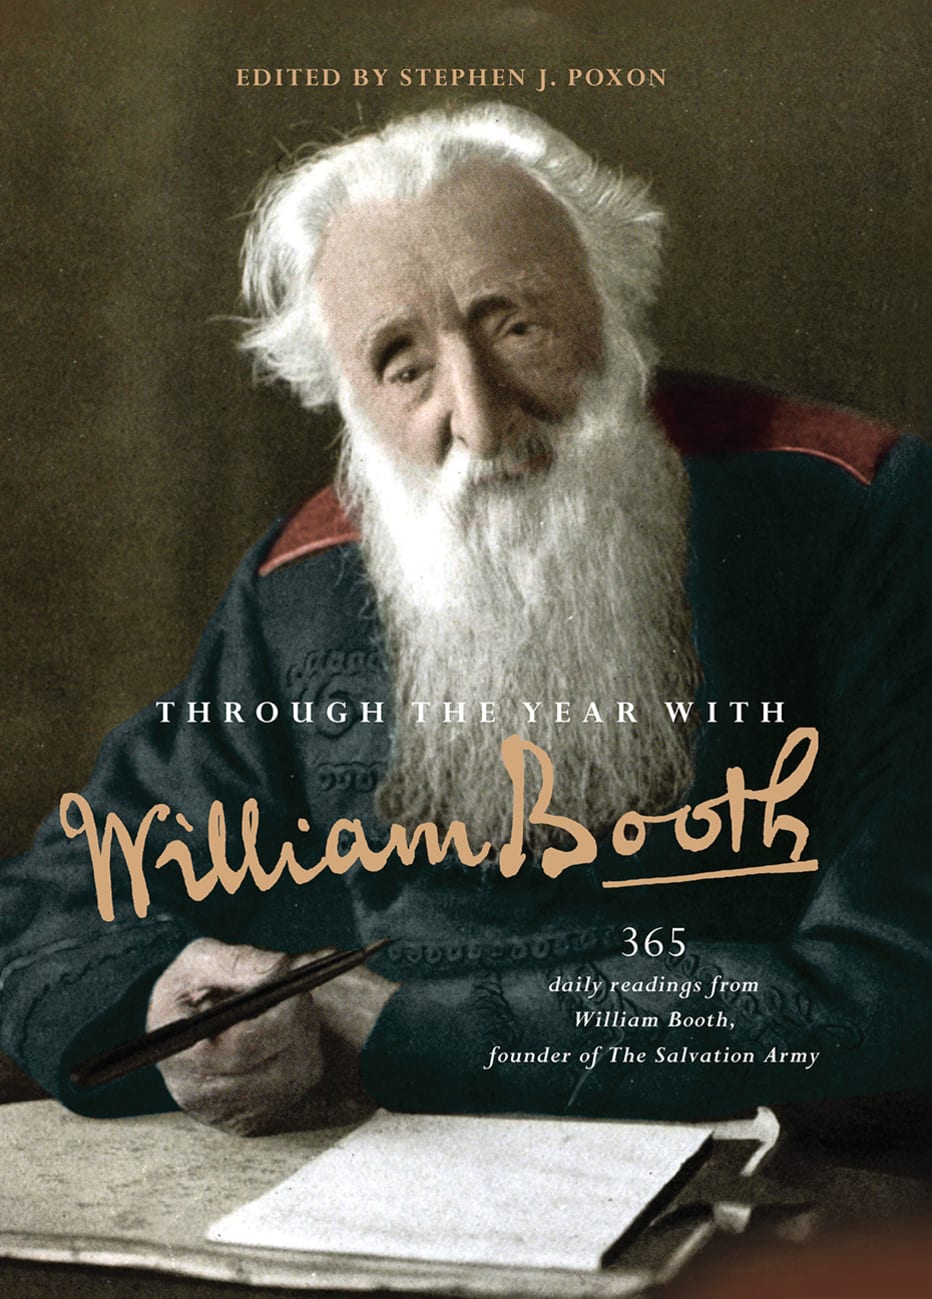 THROUGH THE YEAR WITH WILLIAM BOOTH: 365 DAILY READINGS FROM WILLIAM BOOTH  FOUNDER OF THE SALVATION ARMY